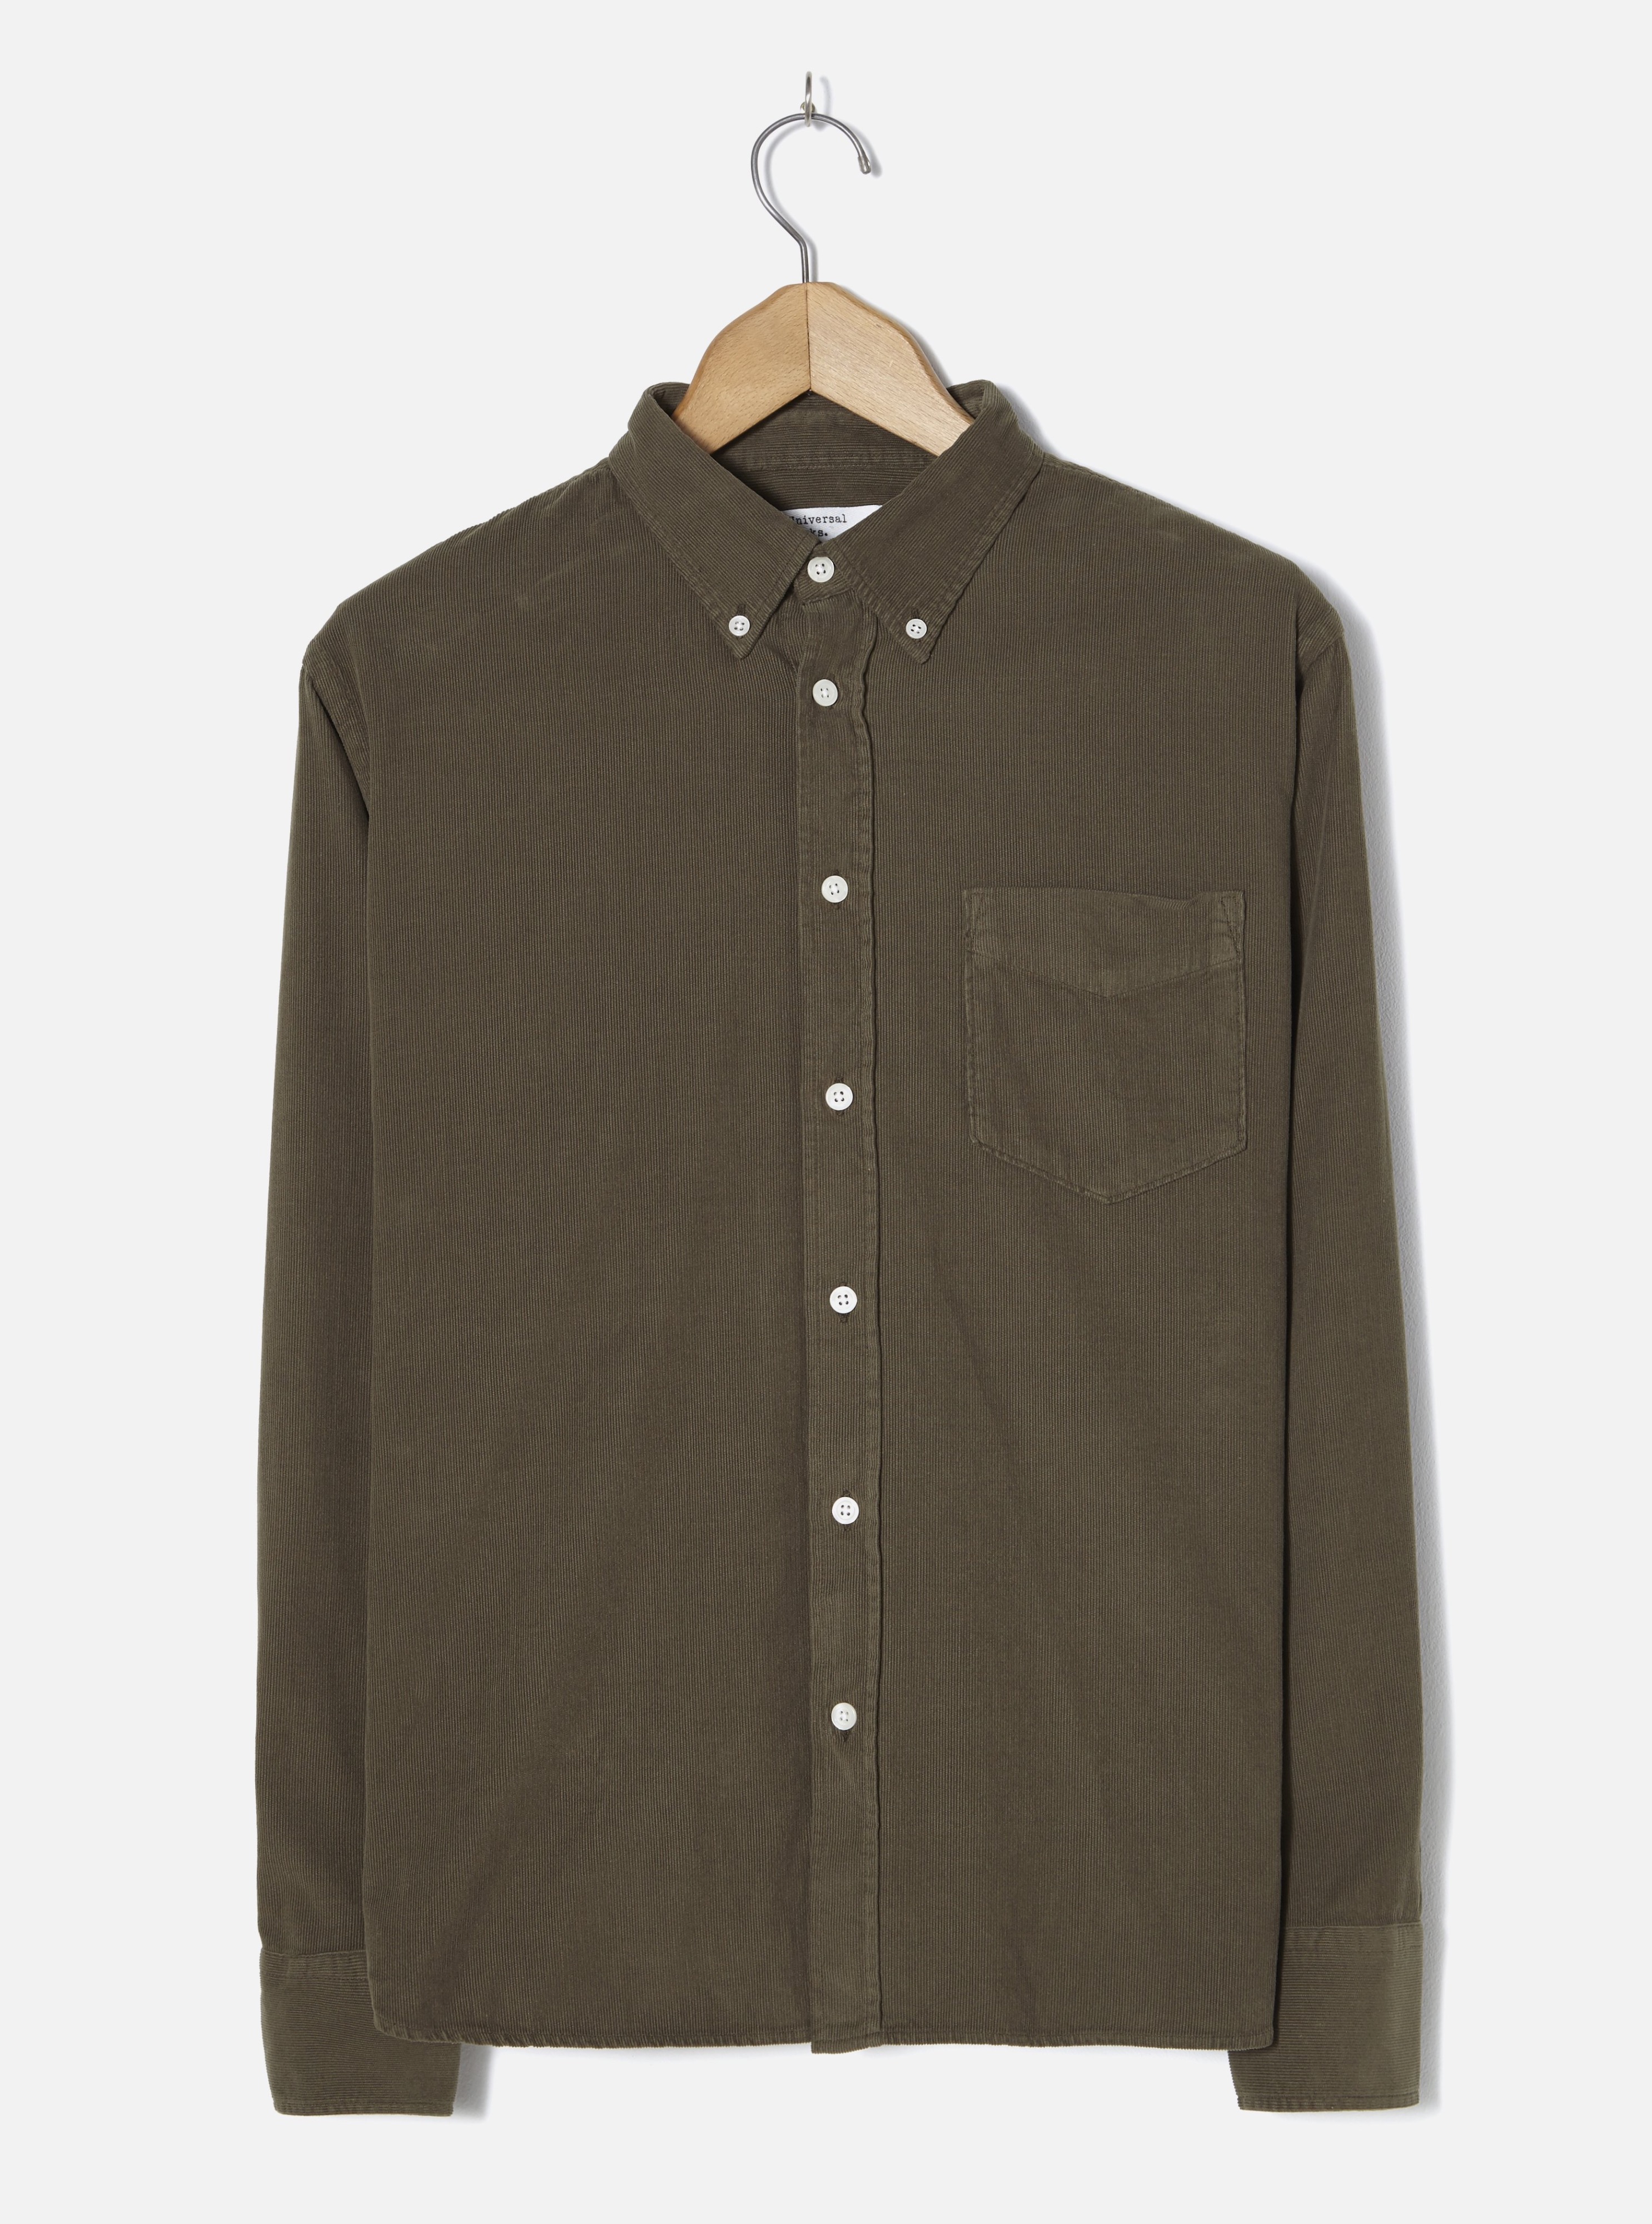 Universal Works Olive Cord Everyday Shirt 